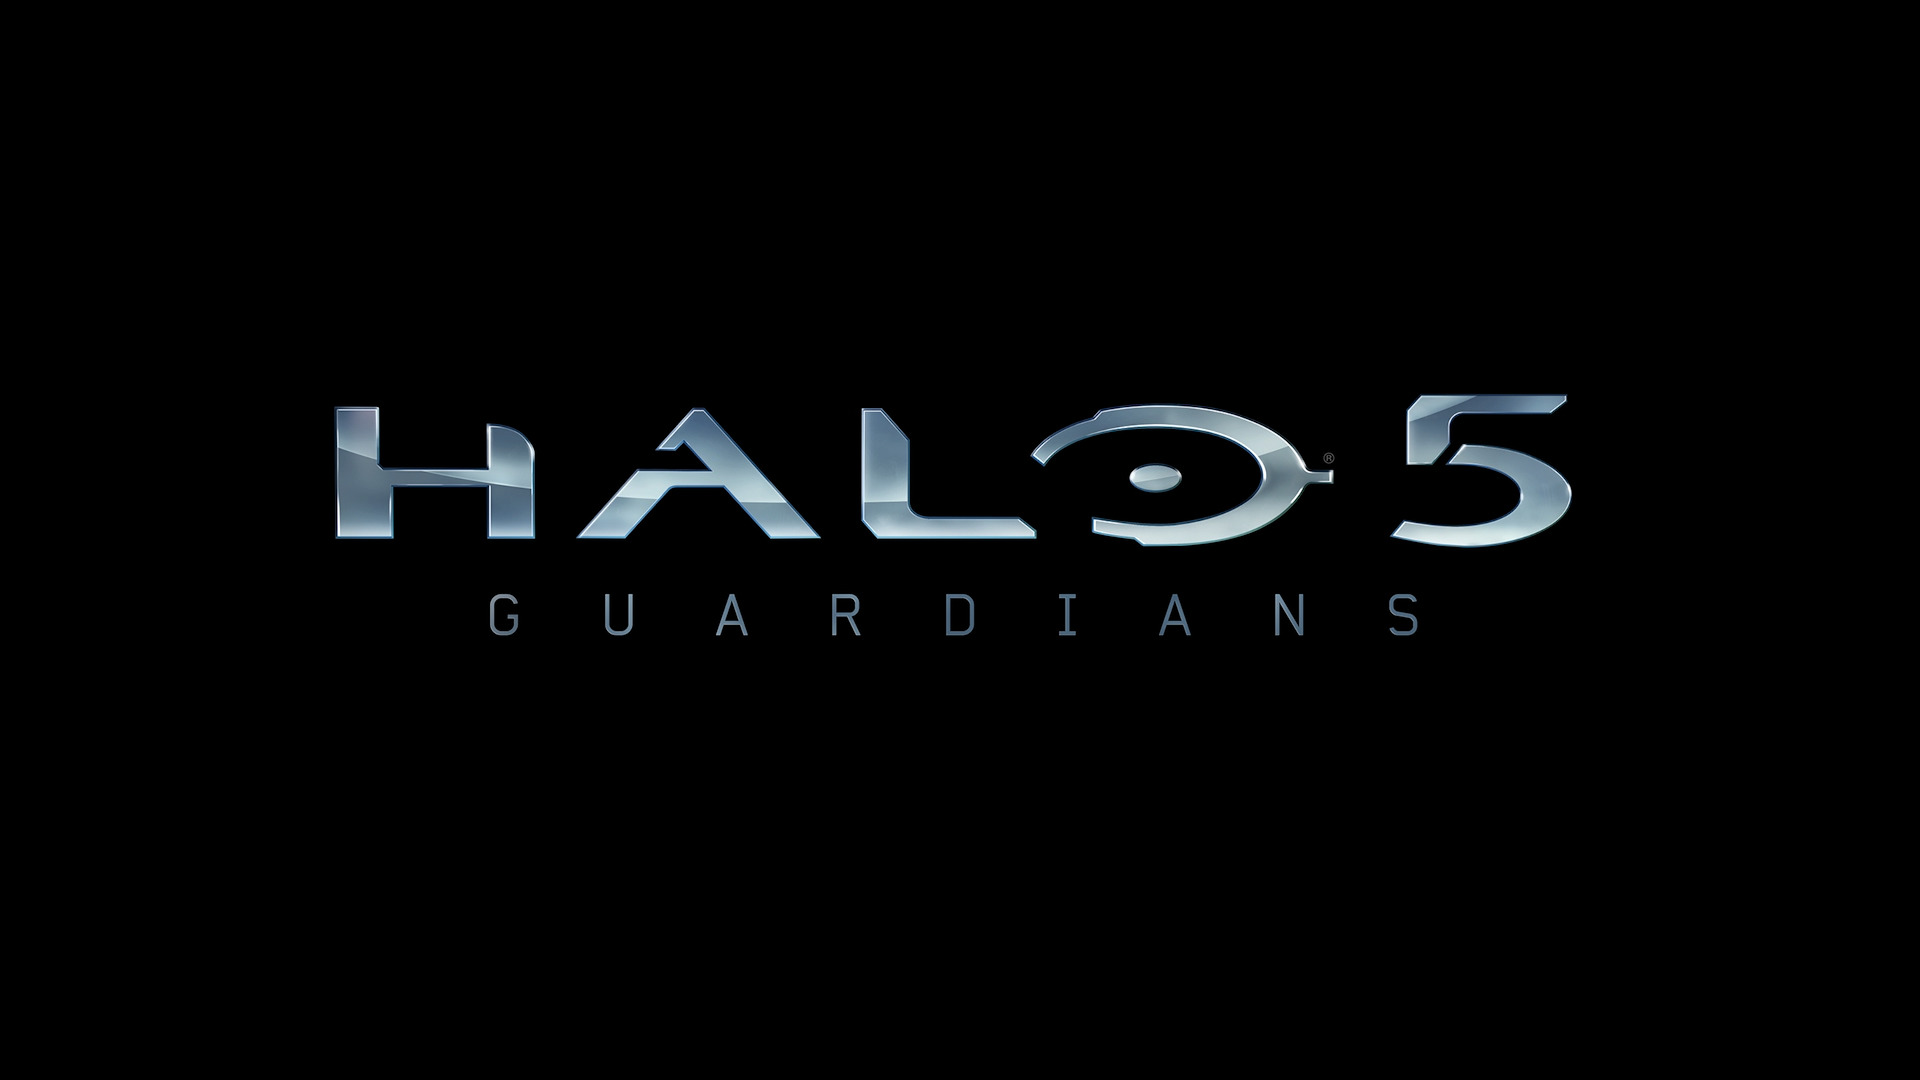 Master Chief, Blue Team, Halo 5: Guardians, UNSC Infinity Wallpaper